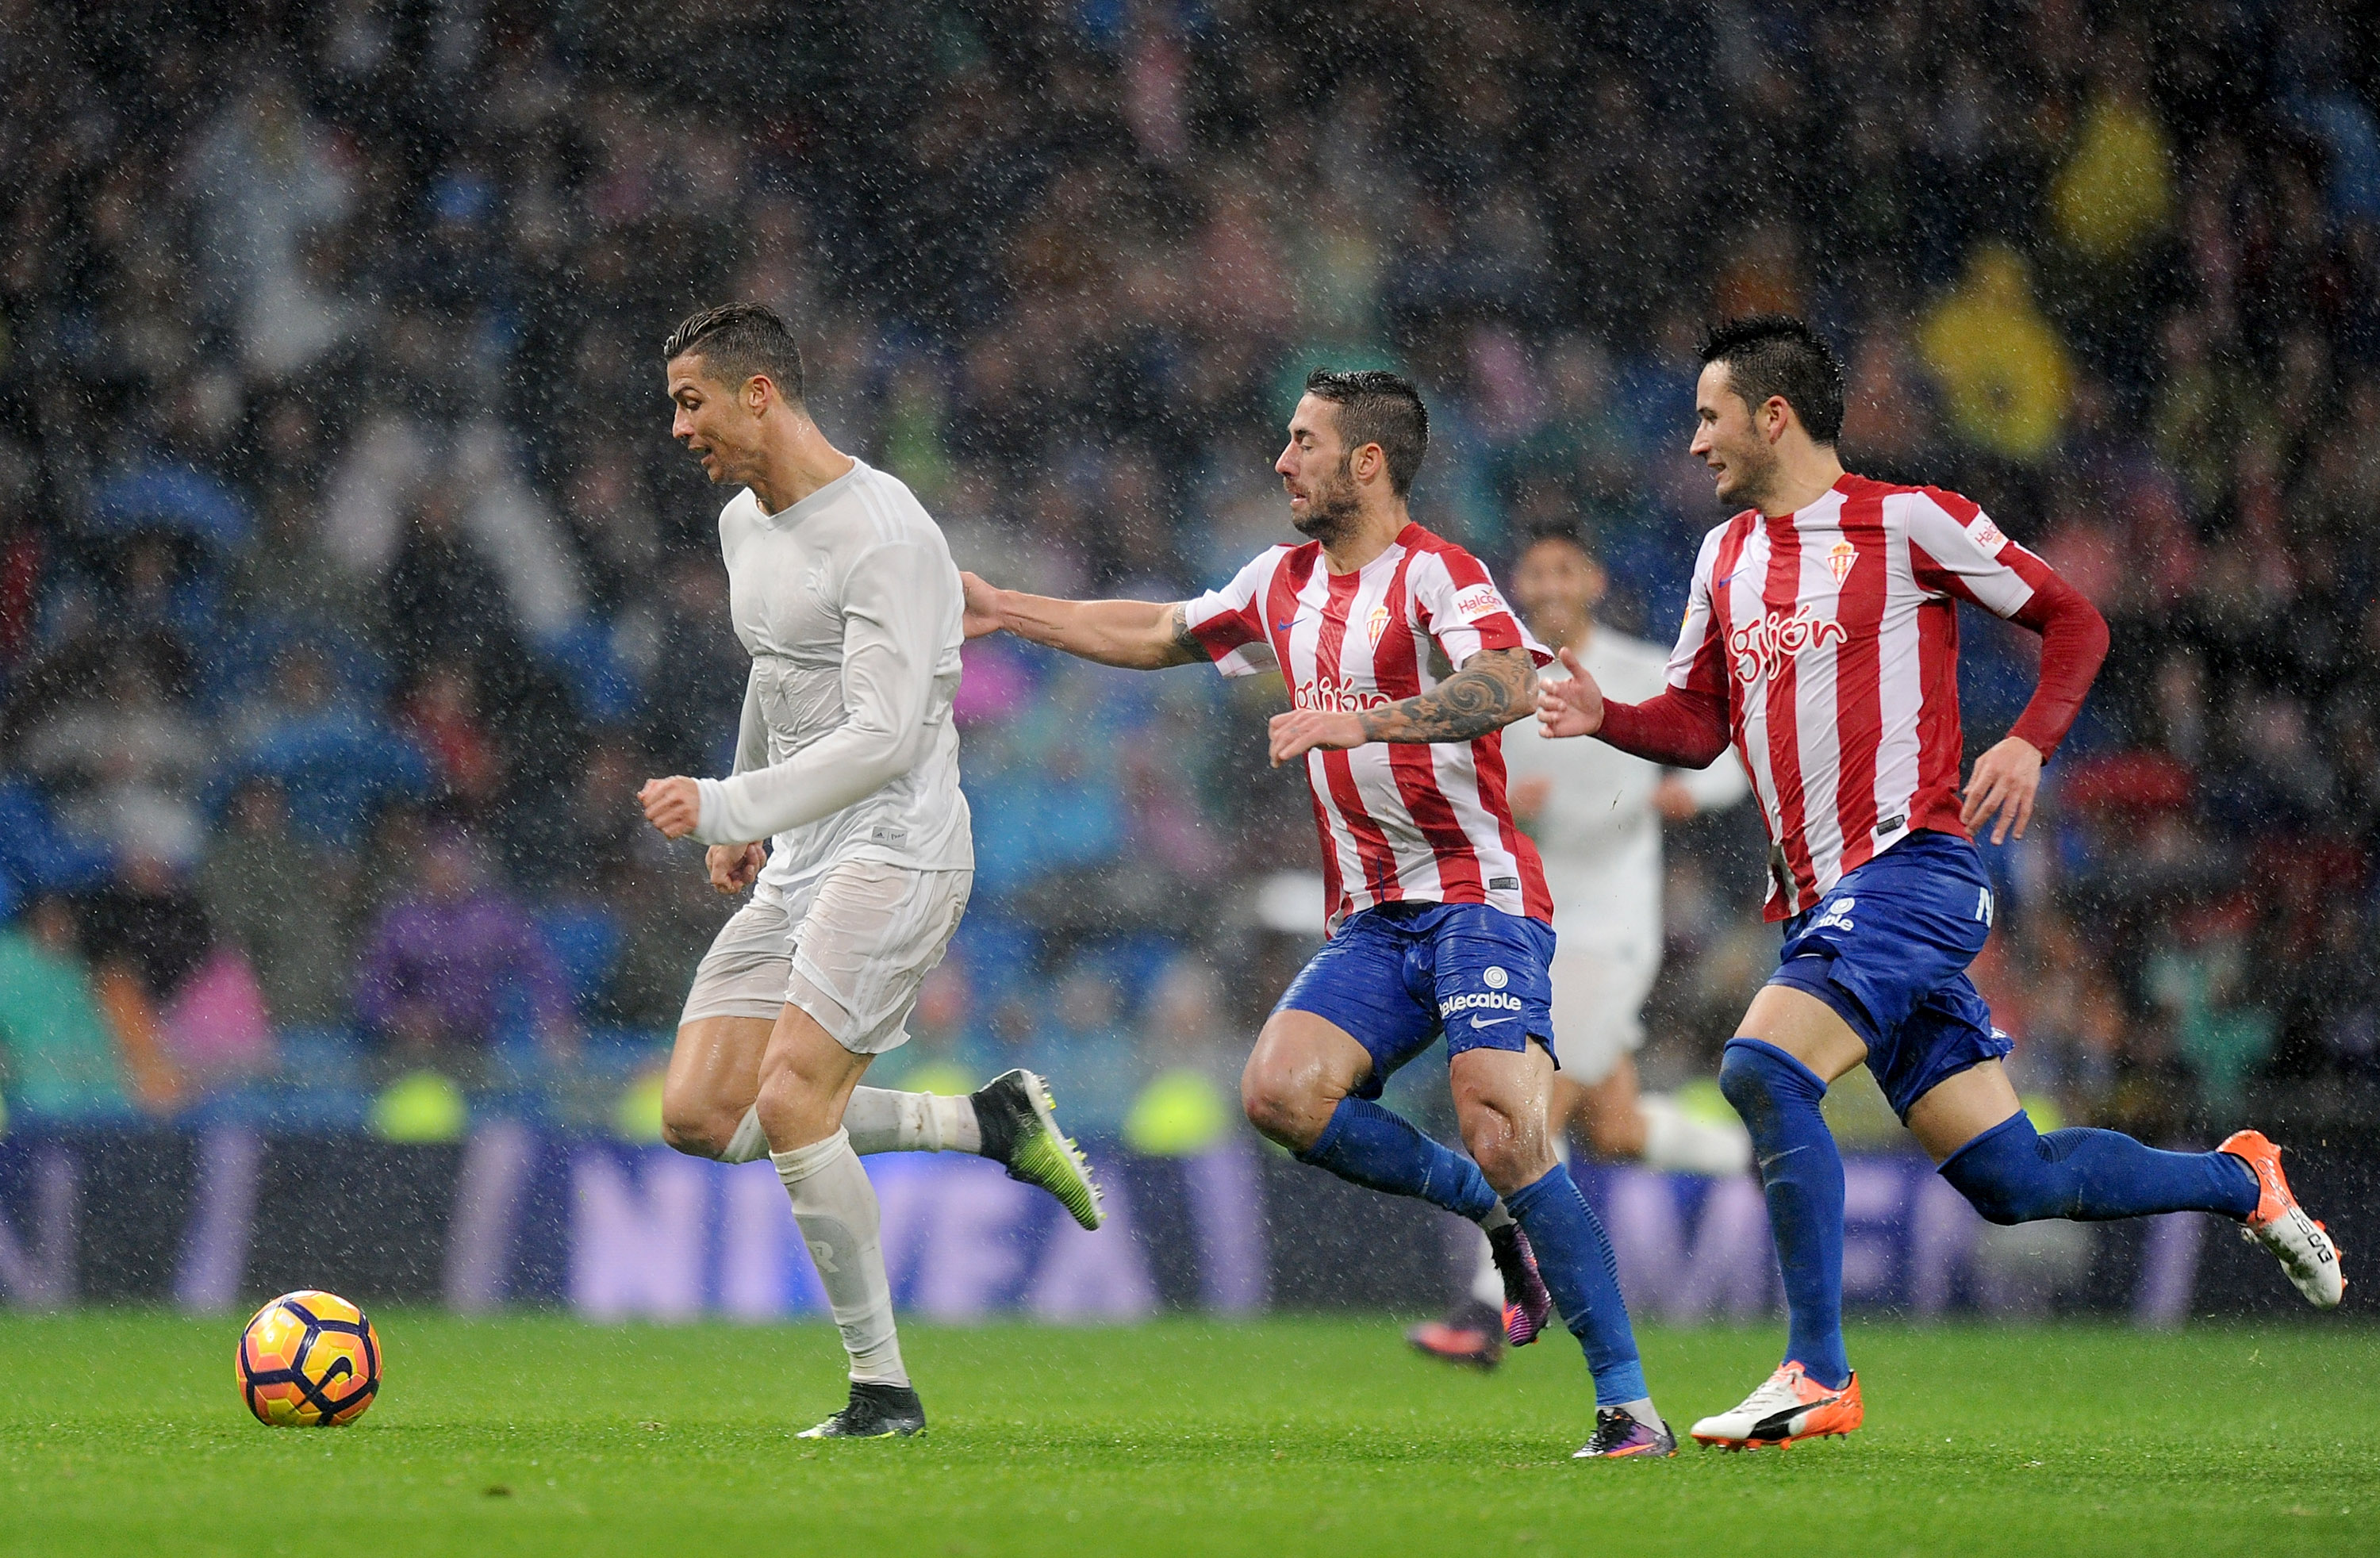 MADRID, SPAIN - NOVEMBER 26:  Cristiano Ronaldo of Real Madrid CF is chased by Manuel Castellano 'Lillo'  of Real Sporting de Gijon during the La Liga match between Real Madrid CF and Real Sporting de Gijon at Estadio Santiago Bernabeu on November 26, 2016 in Madrid, Spain.  (Photo by Denis Doyle/Getty Images)